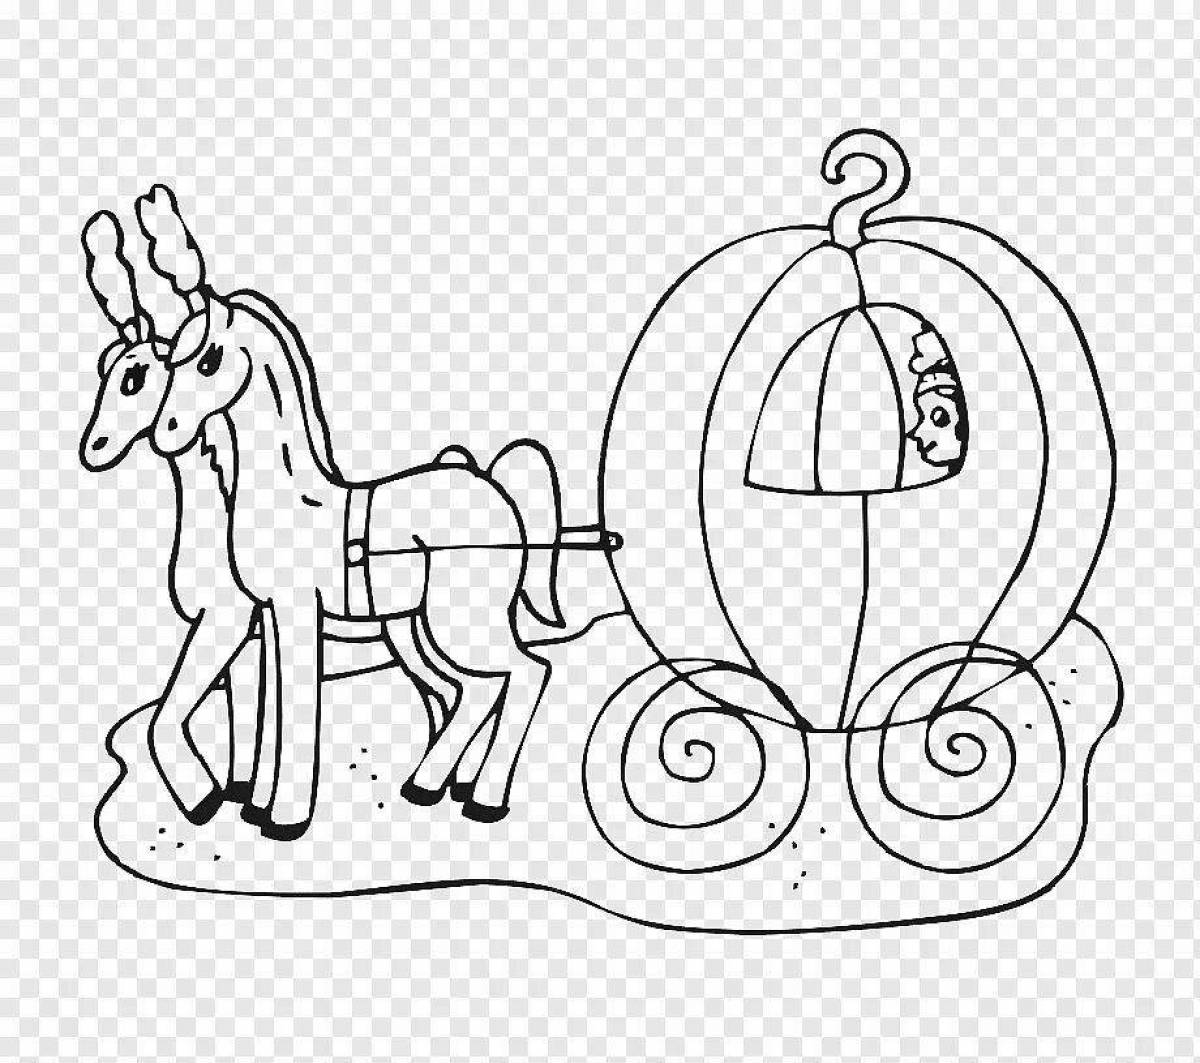 Cinderella's luxury carriage coloring page